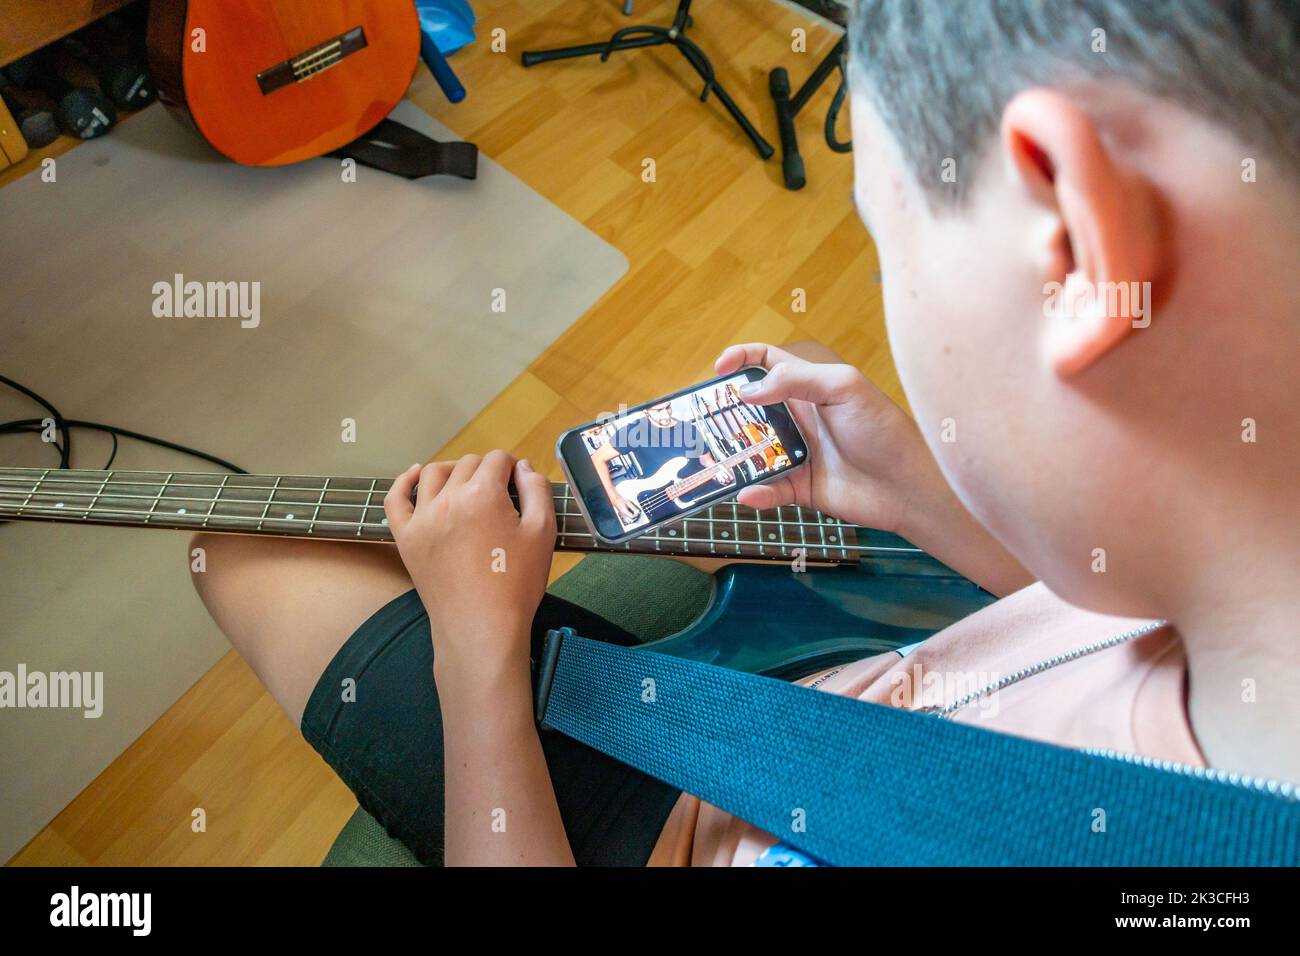 A boy self educates by watching an instructional video on a smartphone to learn how to play a tune on an electric bass guitar Stock Photo